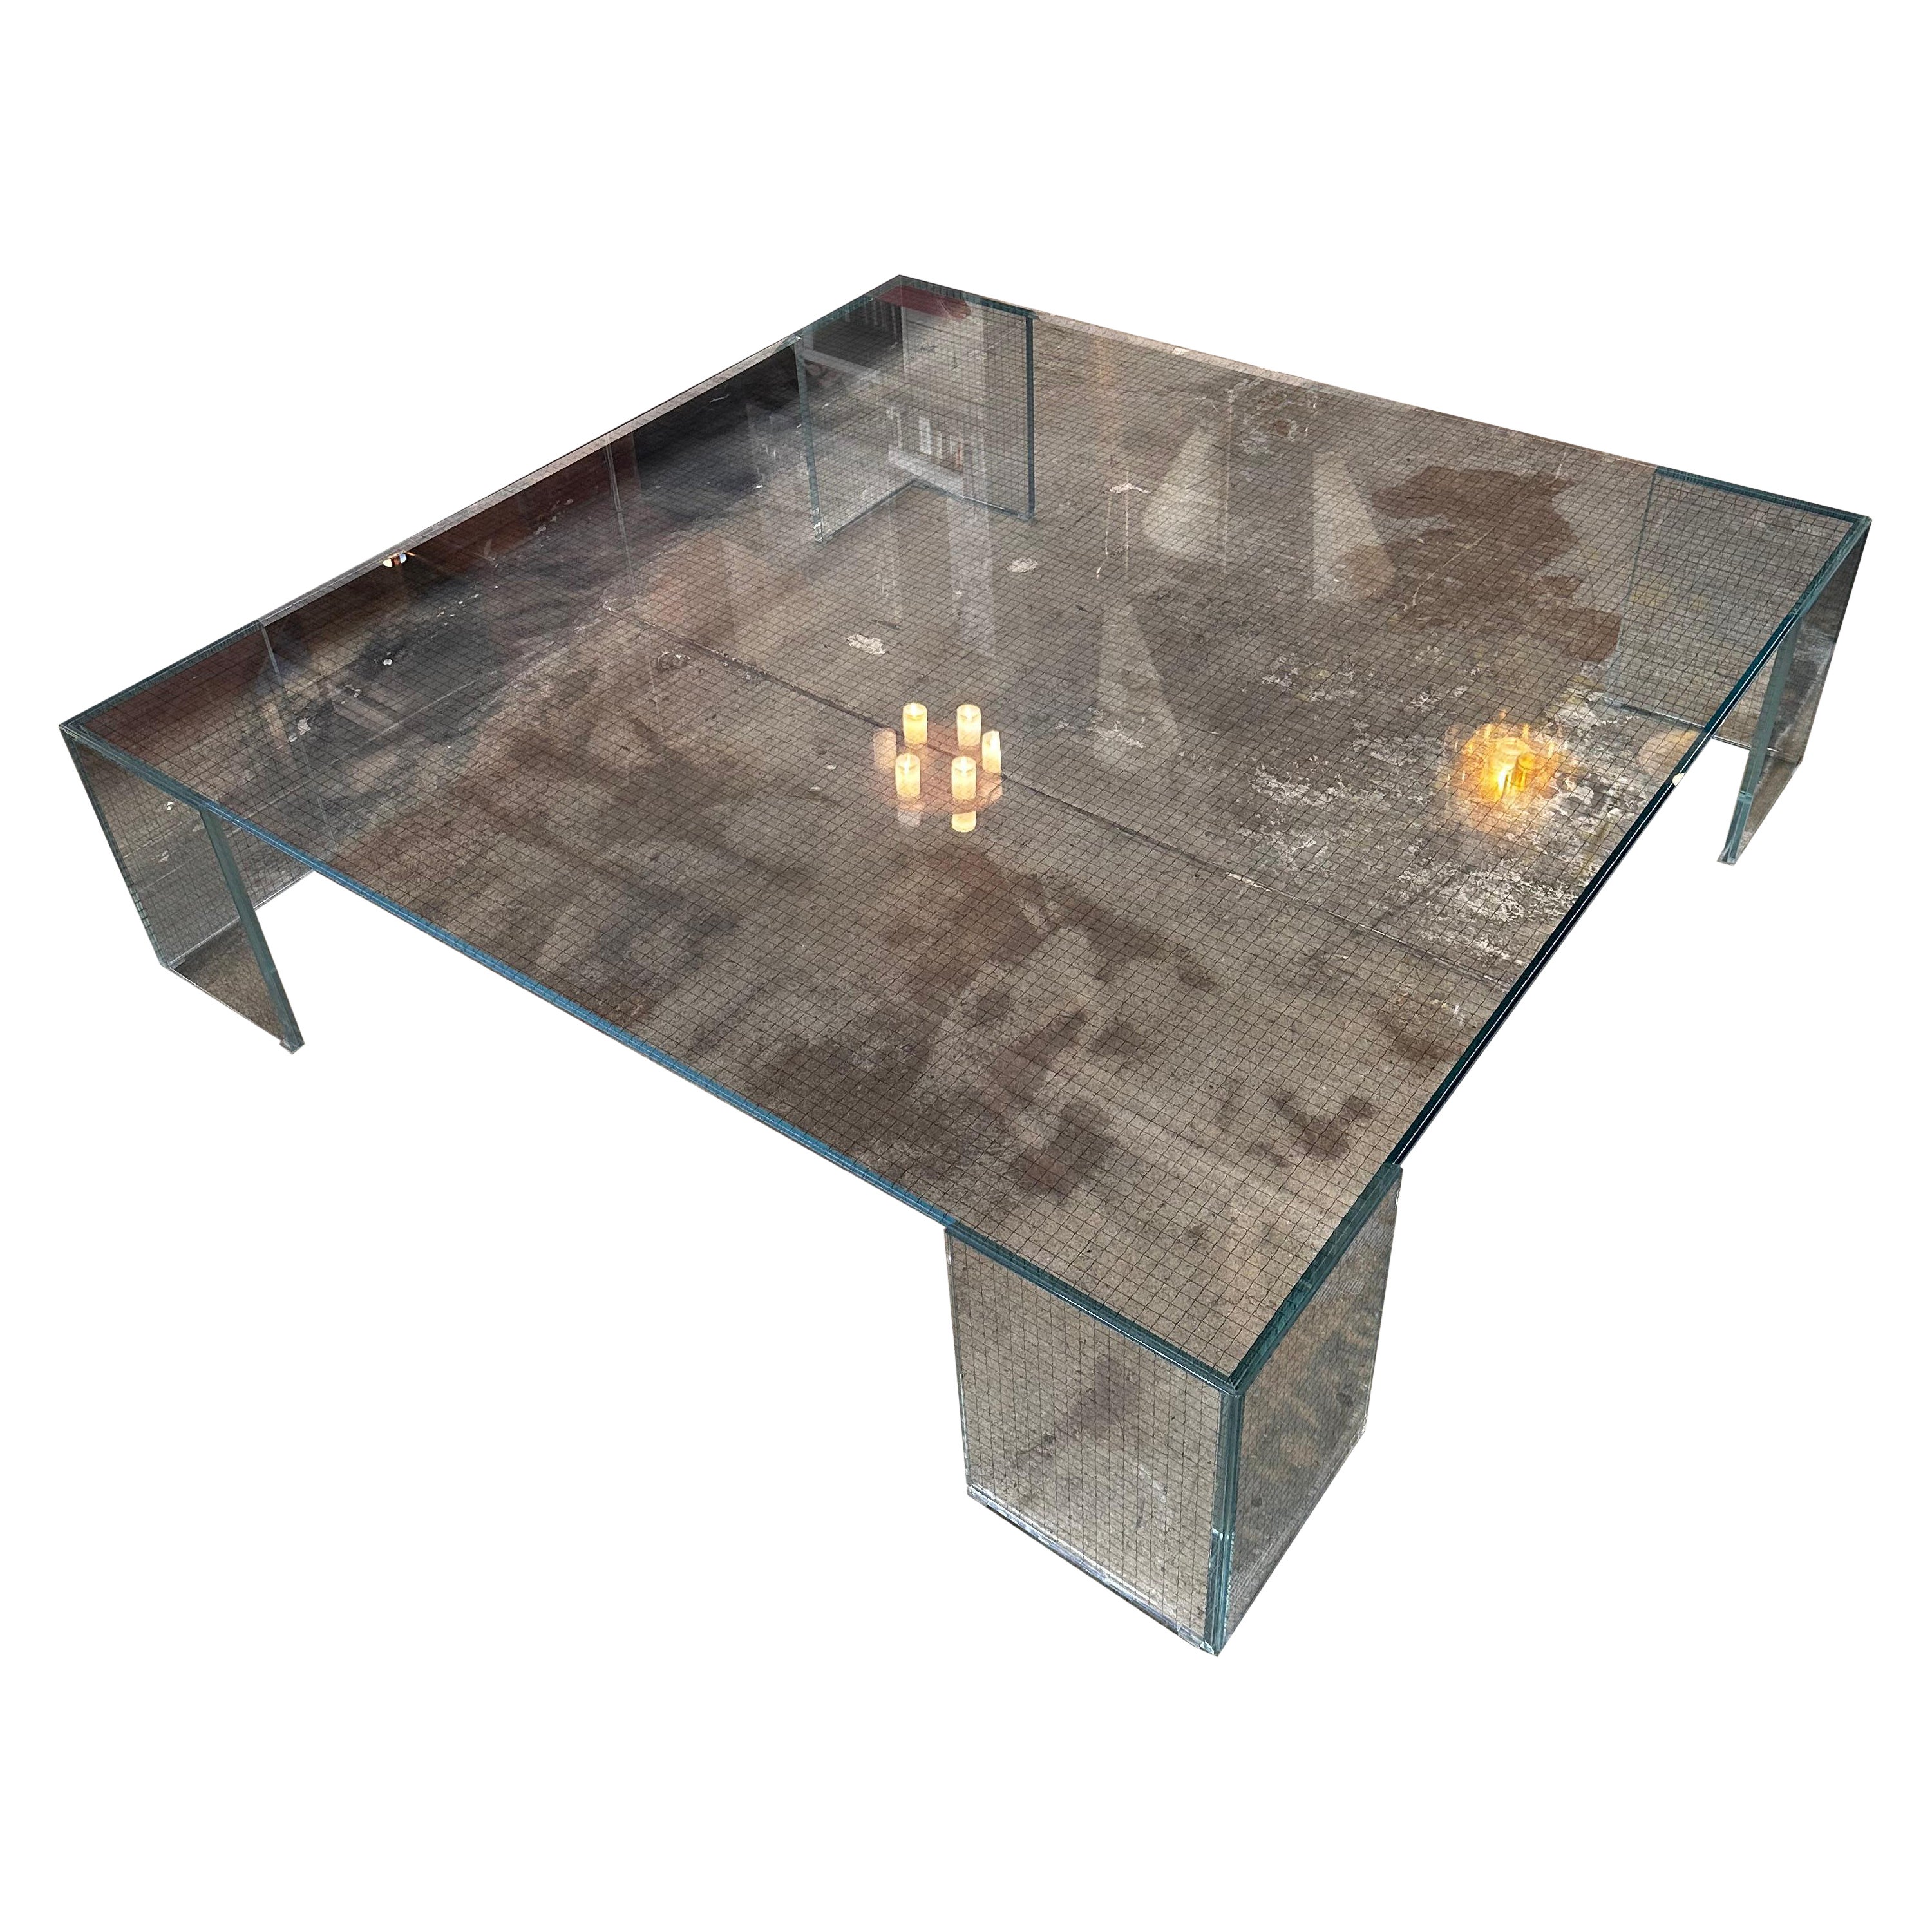 Vintage Italian Oversize Full Glass Coffee Table By Glas Italia 1960 For Sale